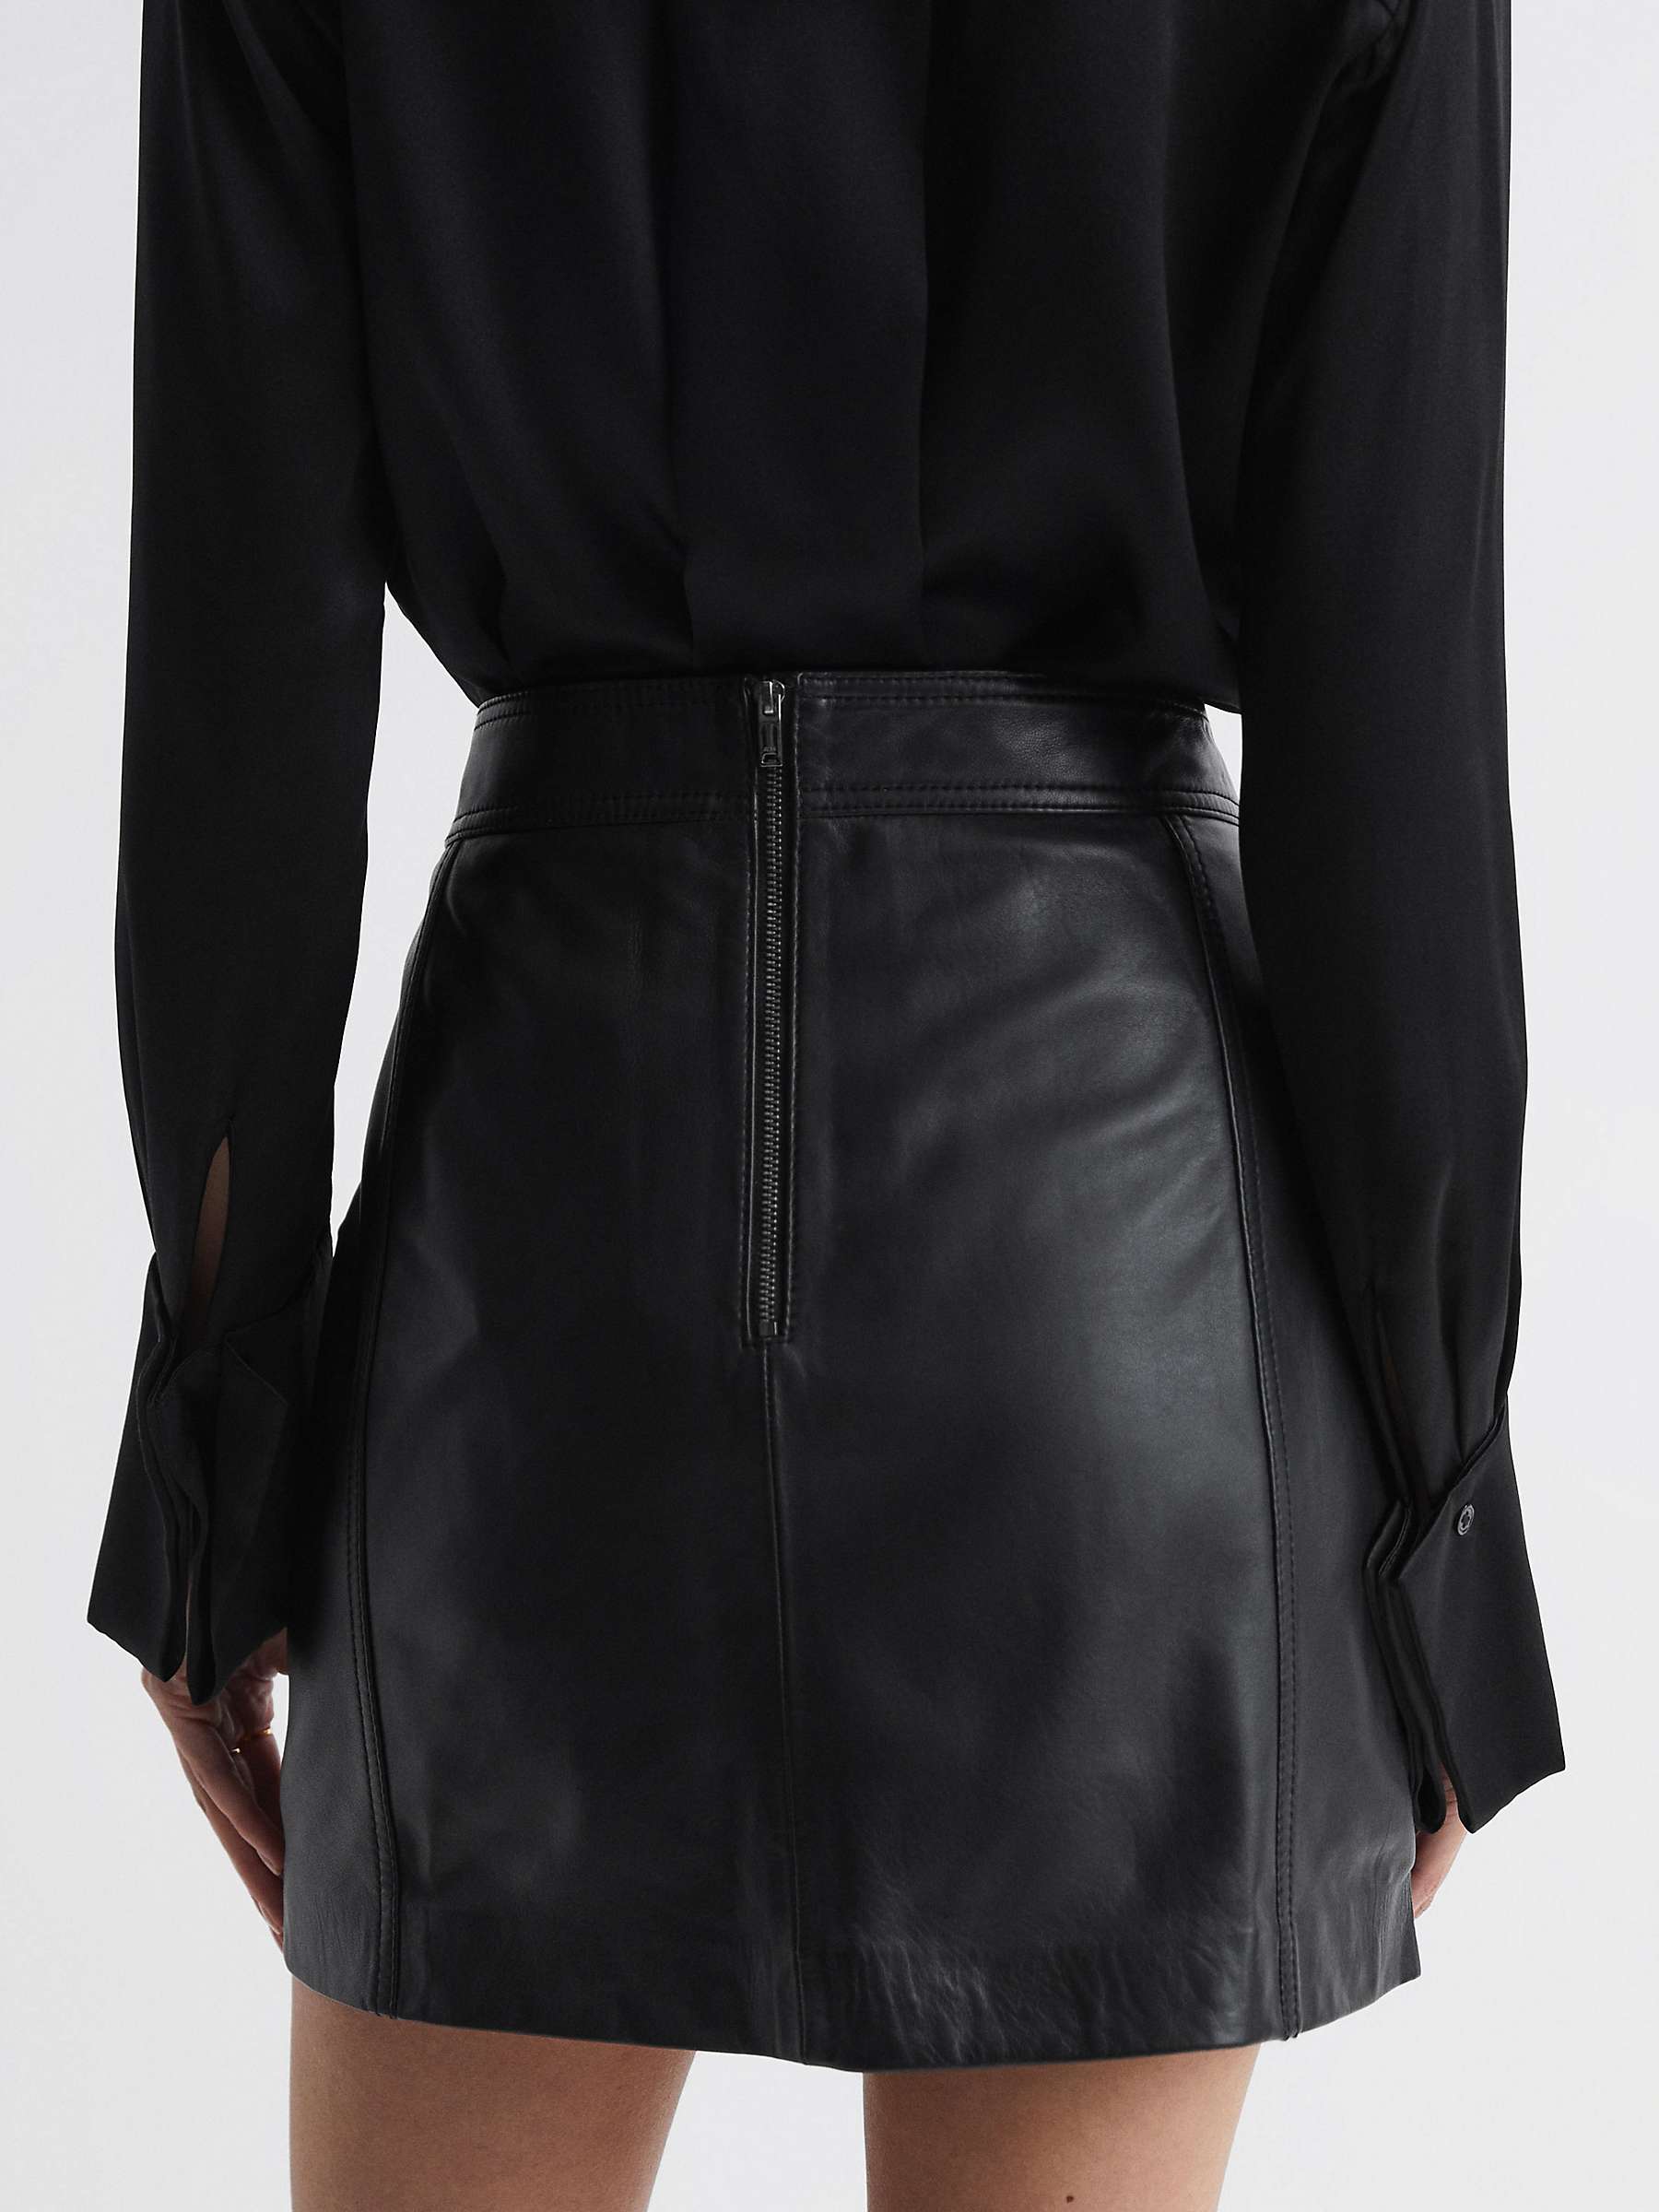 Buy Reiss Edie High Waisted Leather Mini Skirt, Black Online at johnlewis.com